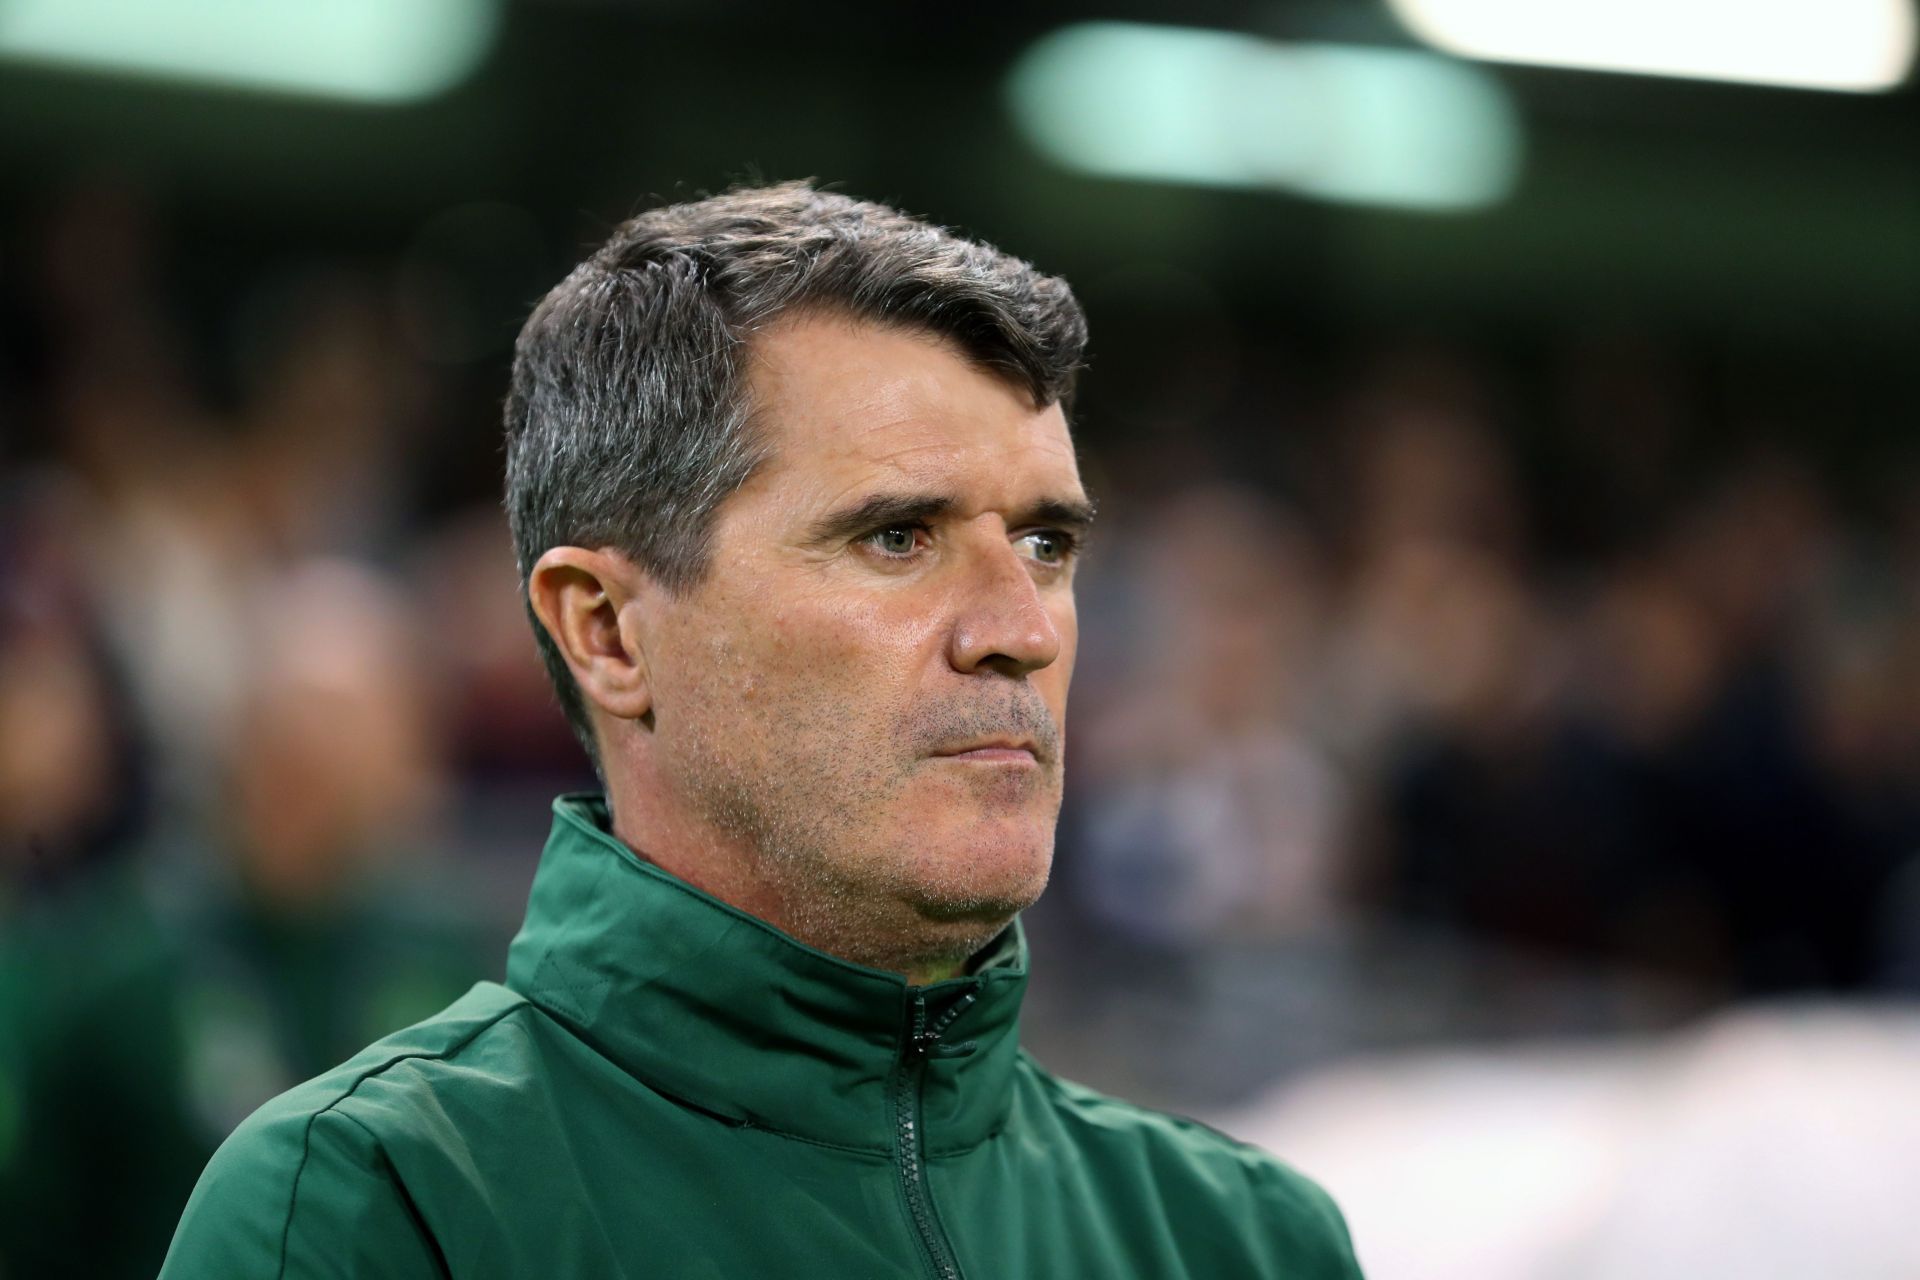 Roy Keane has made a name for himself as a pundit who does not hold back